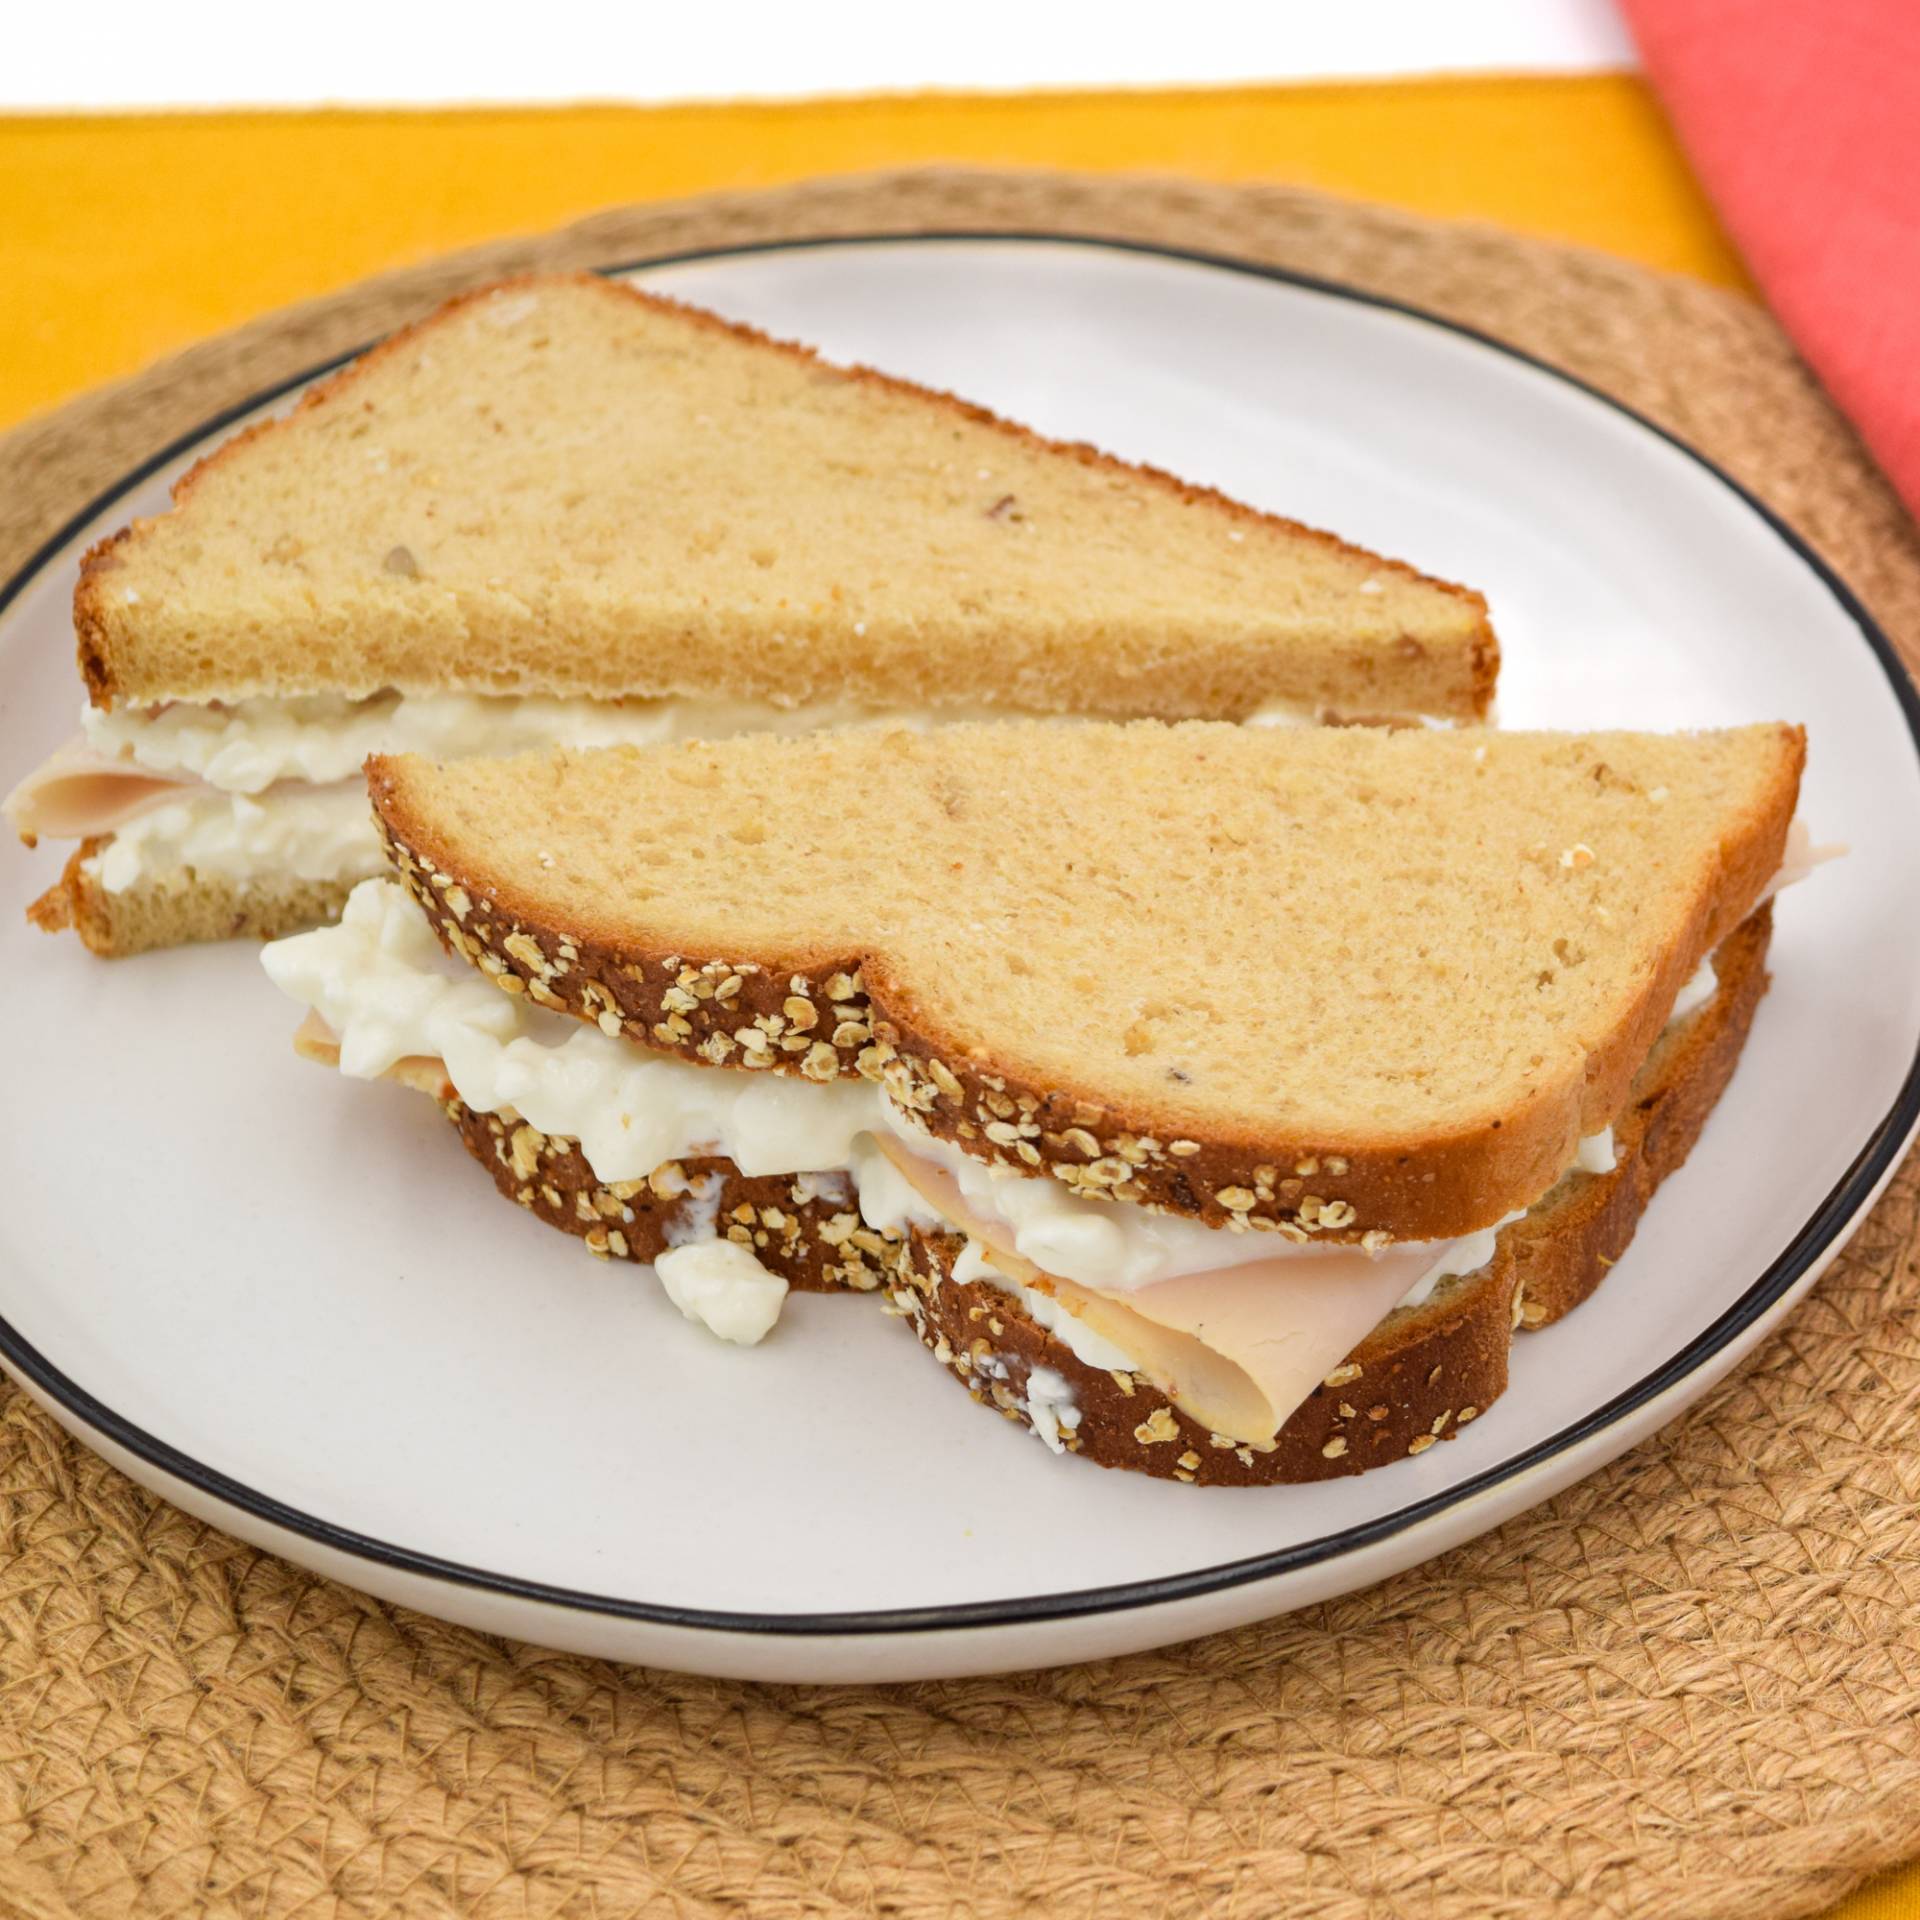 Turkey breast and cottage cheese sandwich